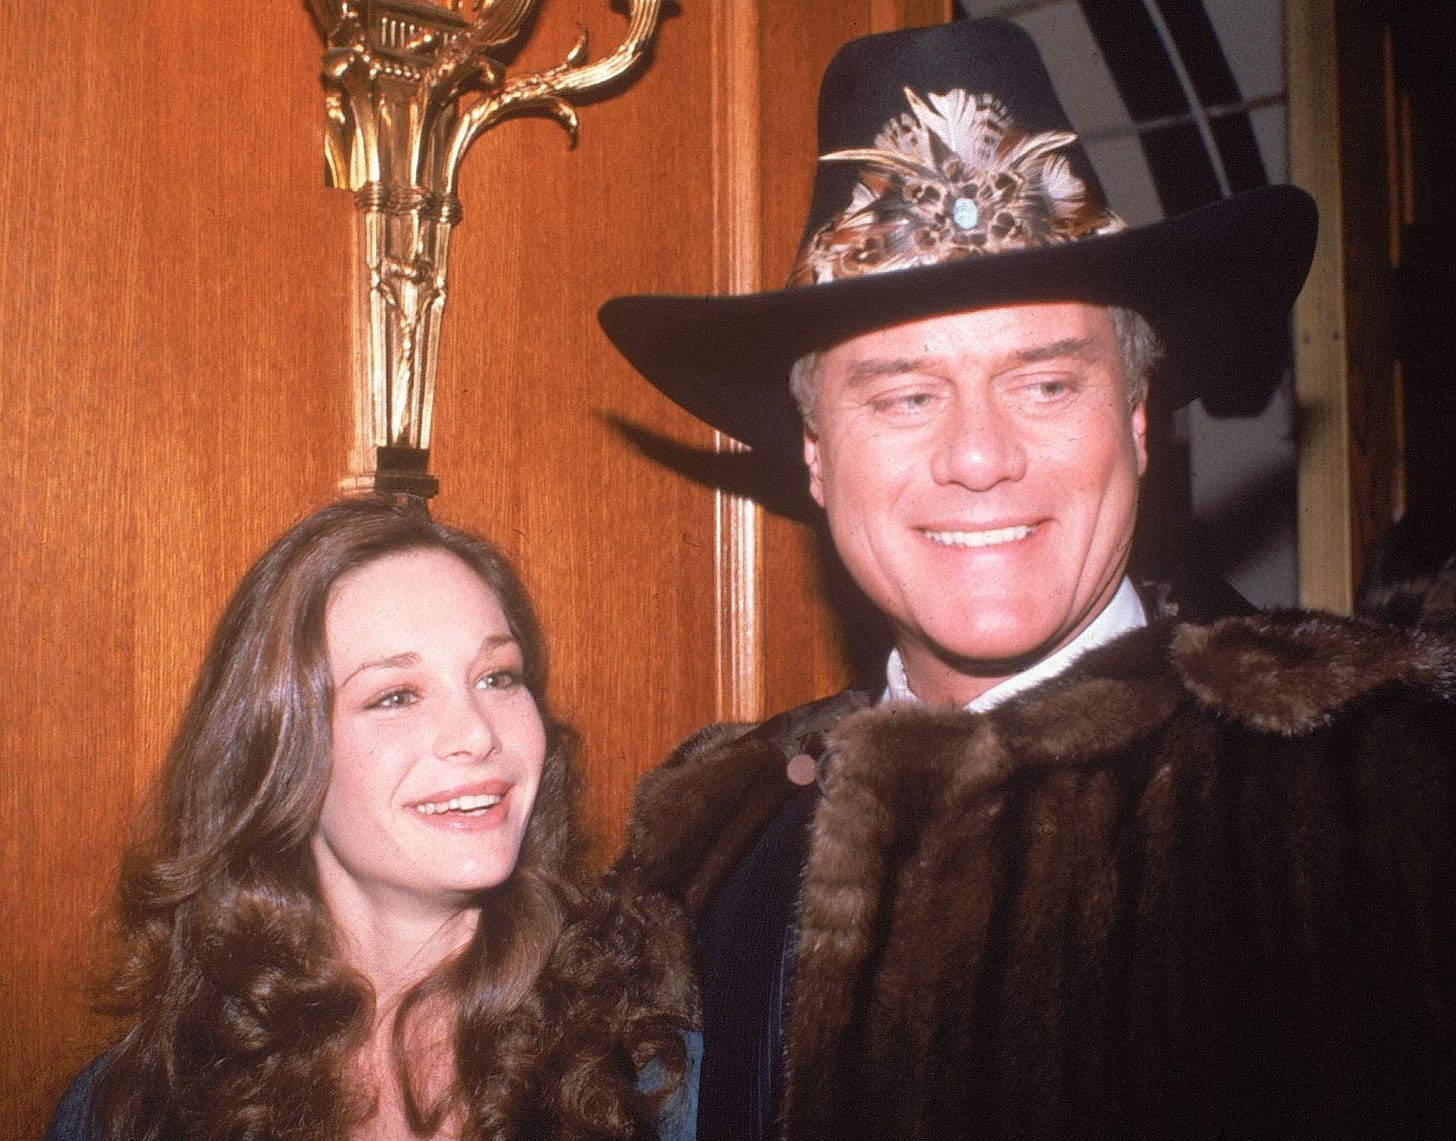 Mary Crosby and Larry Hagman, who played J.R. Ewing in ''Dallas,'' appear at a party in Los Angeles on Nov. 21, 1980. (AP Photo/Rasmussen, File)